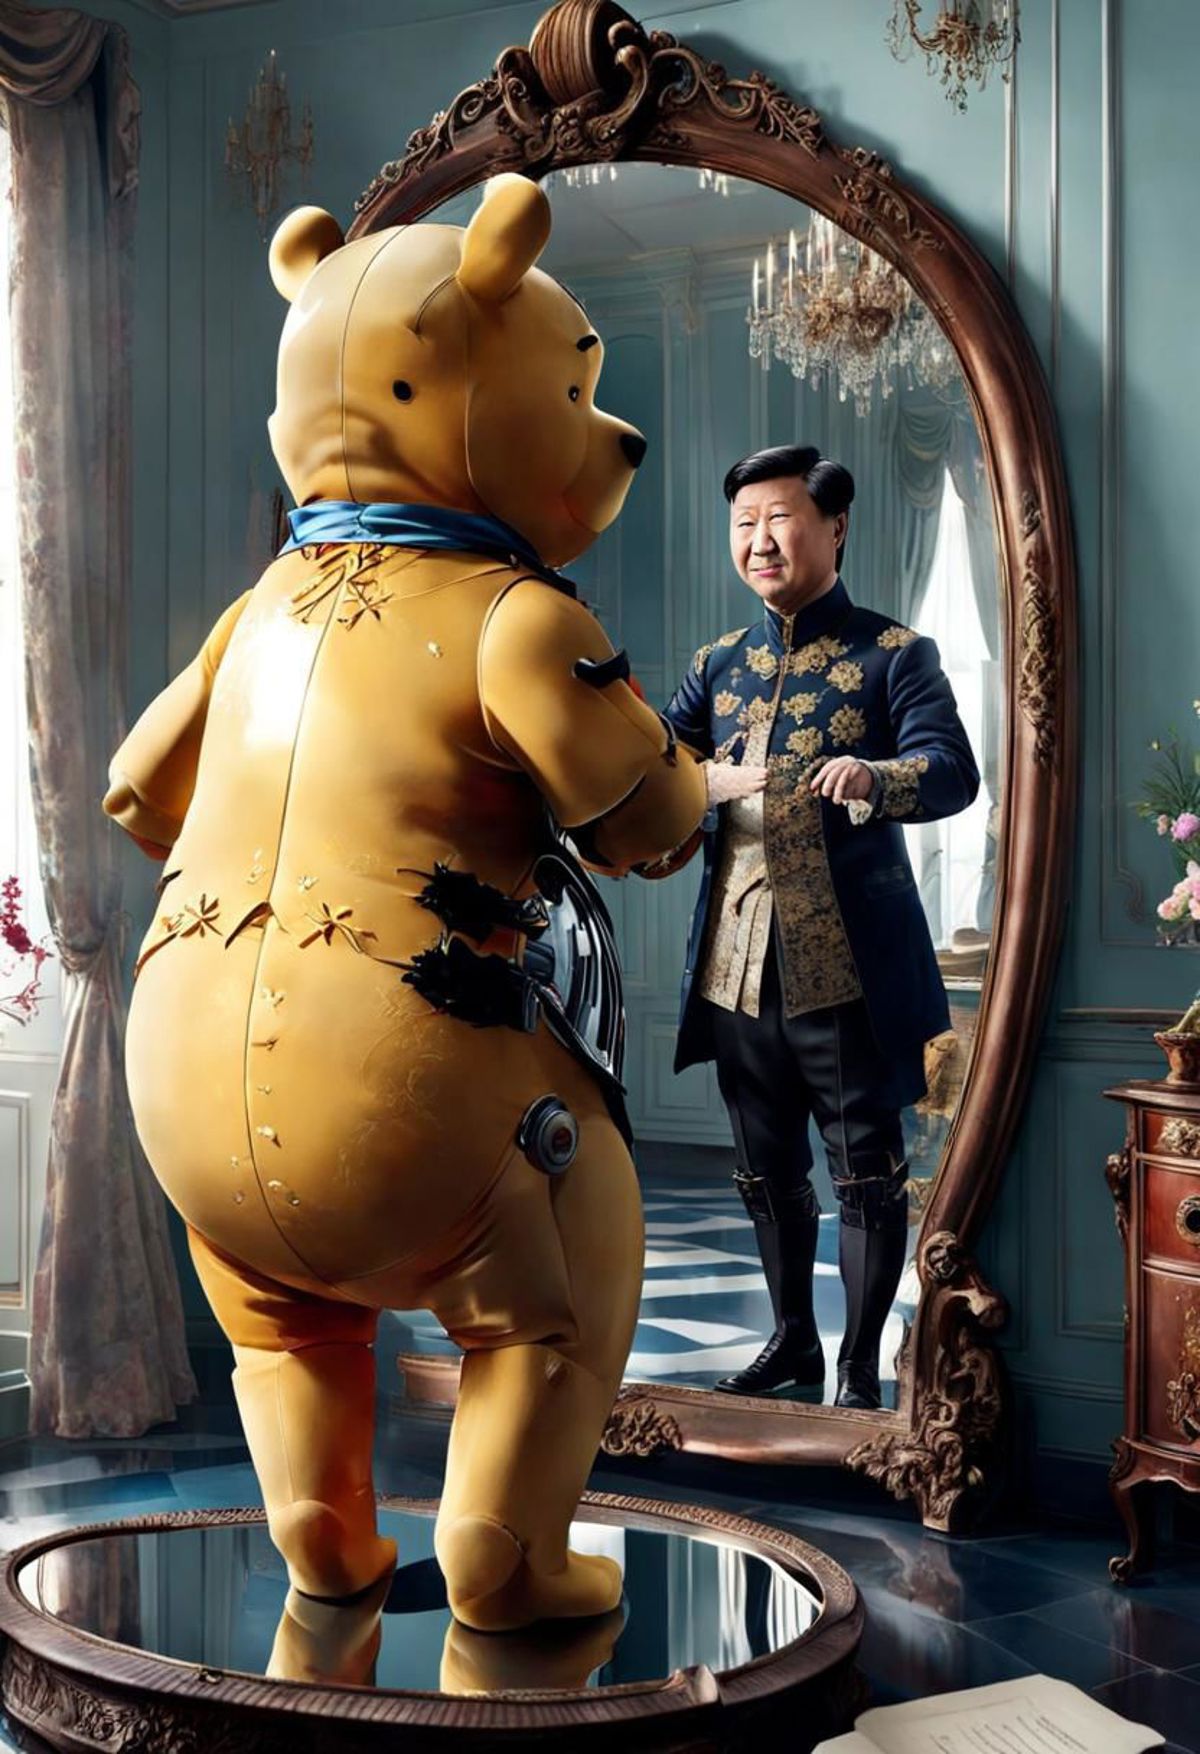 A man wearing a suit and a blue scarf is standing in front of a mirror, adjusting his tie. A large teddy bear, or a giant Winnie the Pooh, is also in the scene, positioned behind the man. The teddy bear is wearing a blue scarf and is looking at the man as he adjusts his tie. The overall atmosphere of the image is whimsical and playful, with the teddy bear appearing to be a part of the man's life.